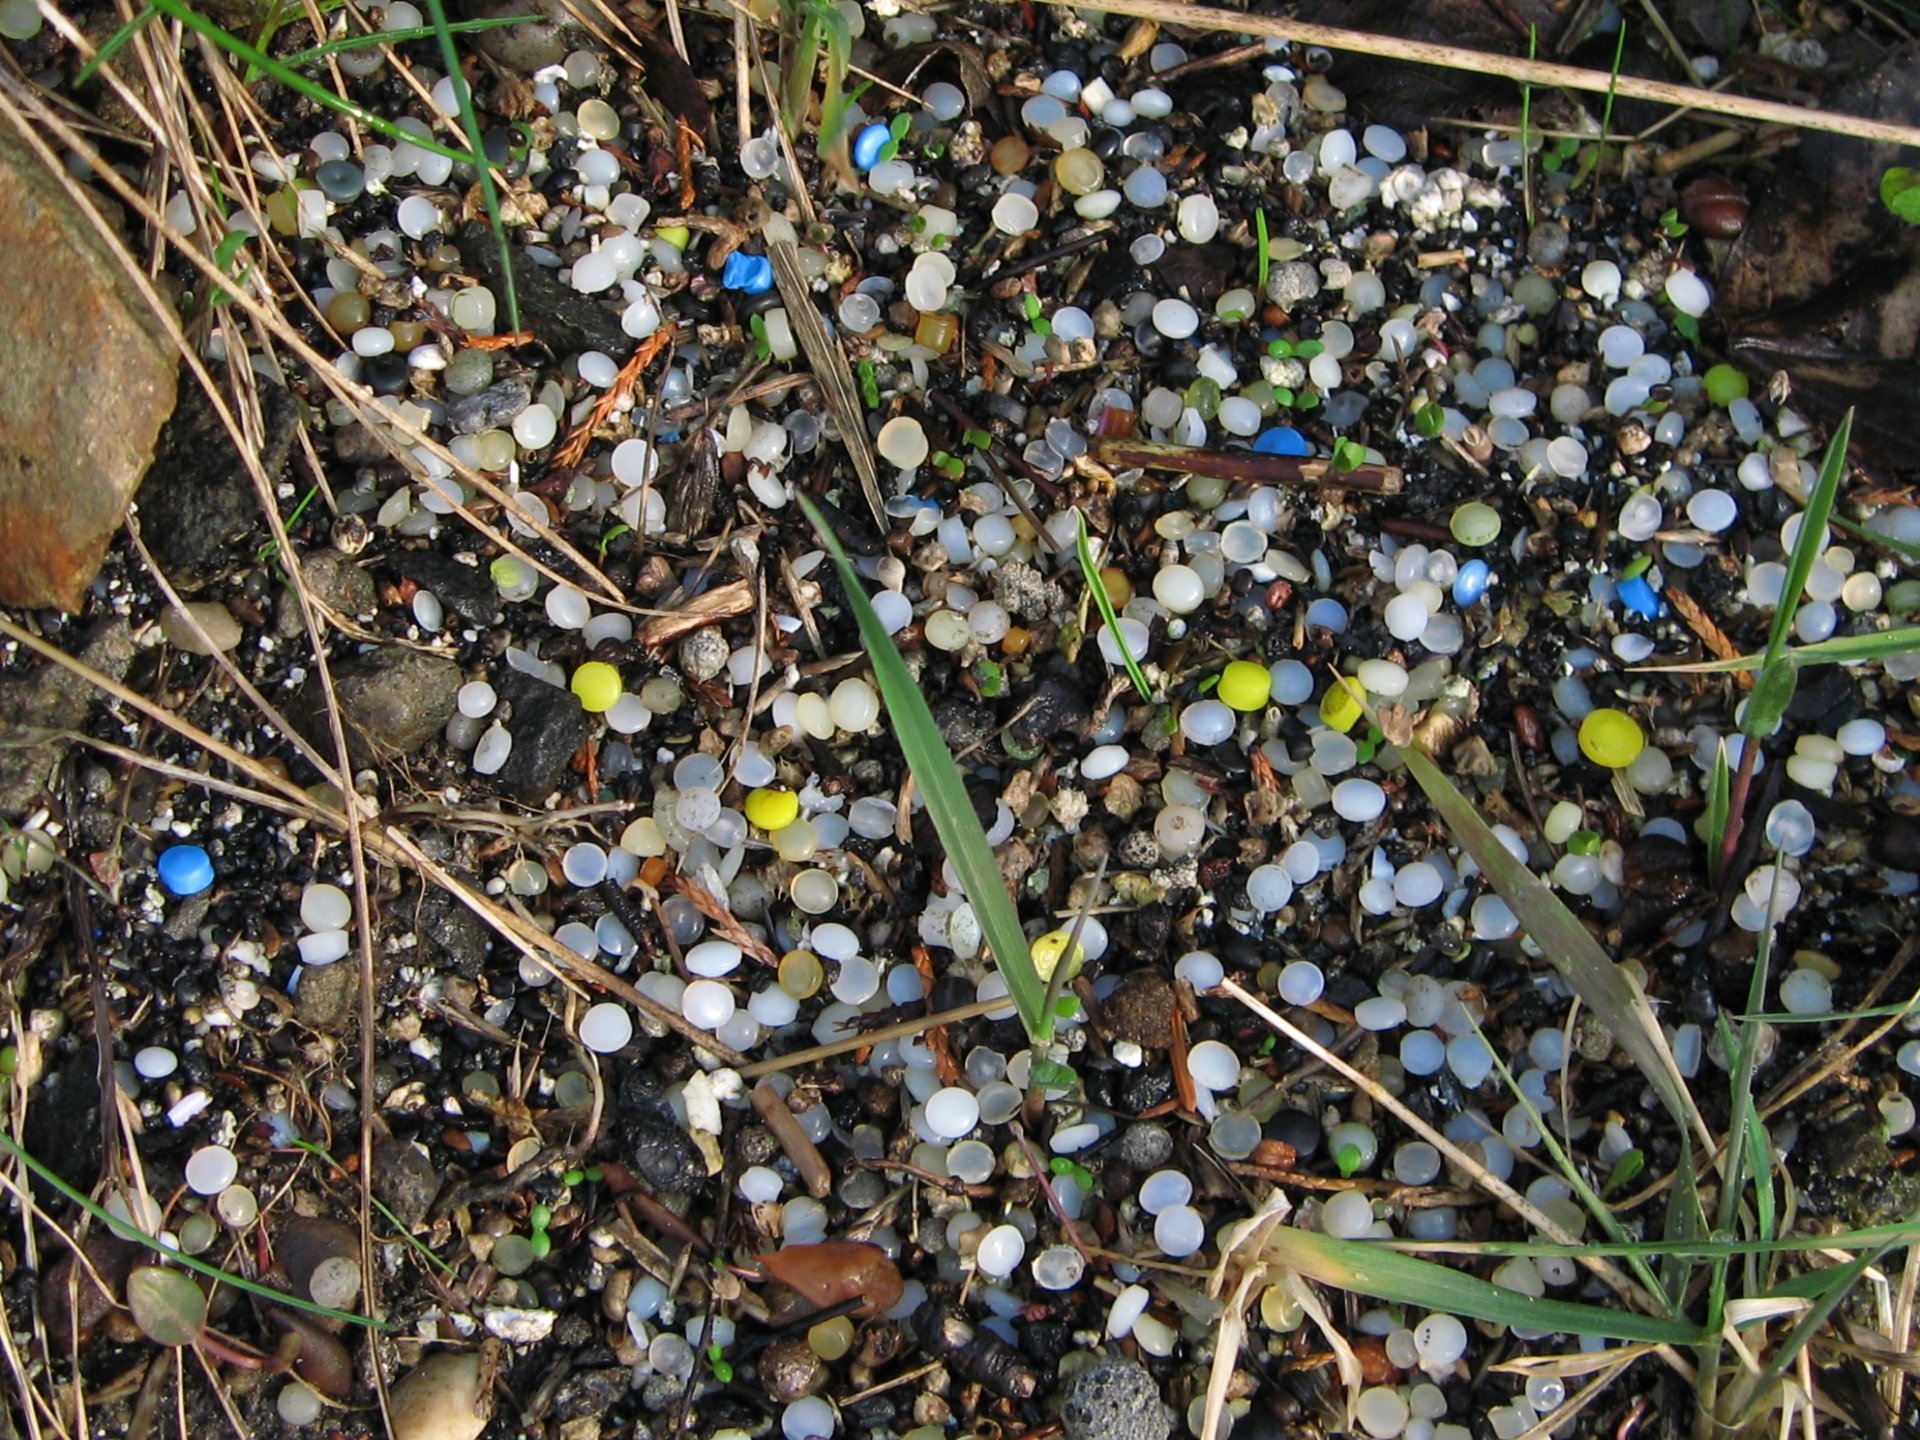 Nurdles all over the ground with a few shoots of grass poking out